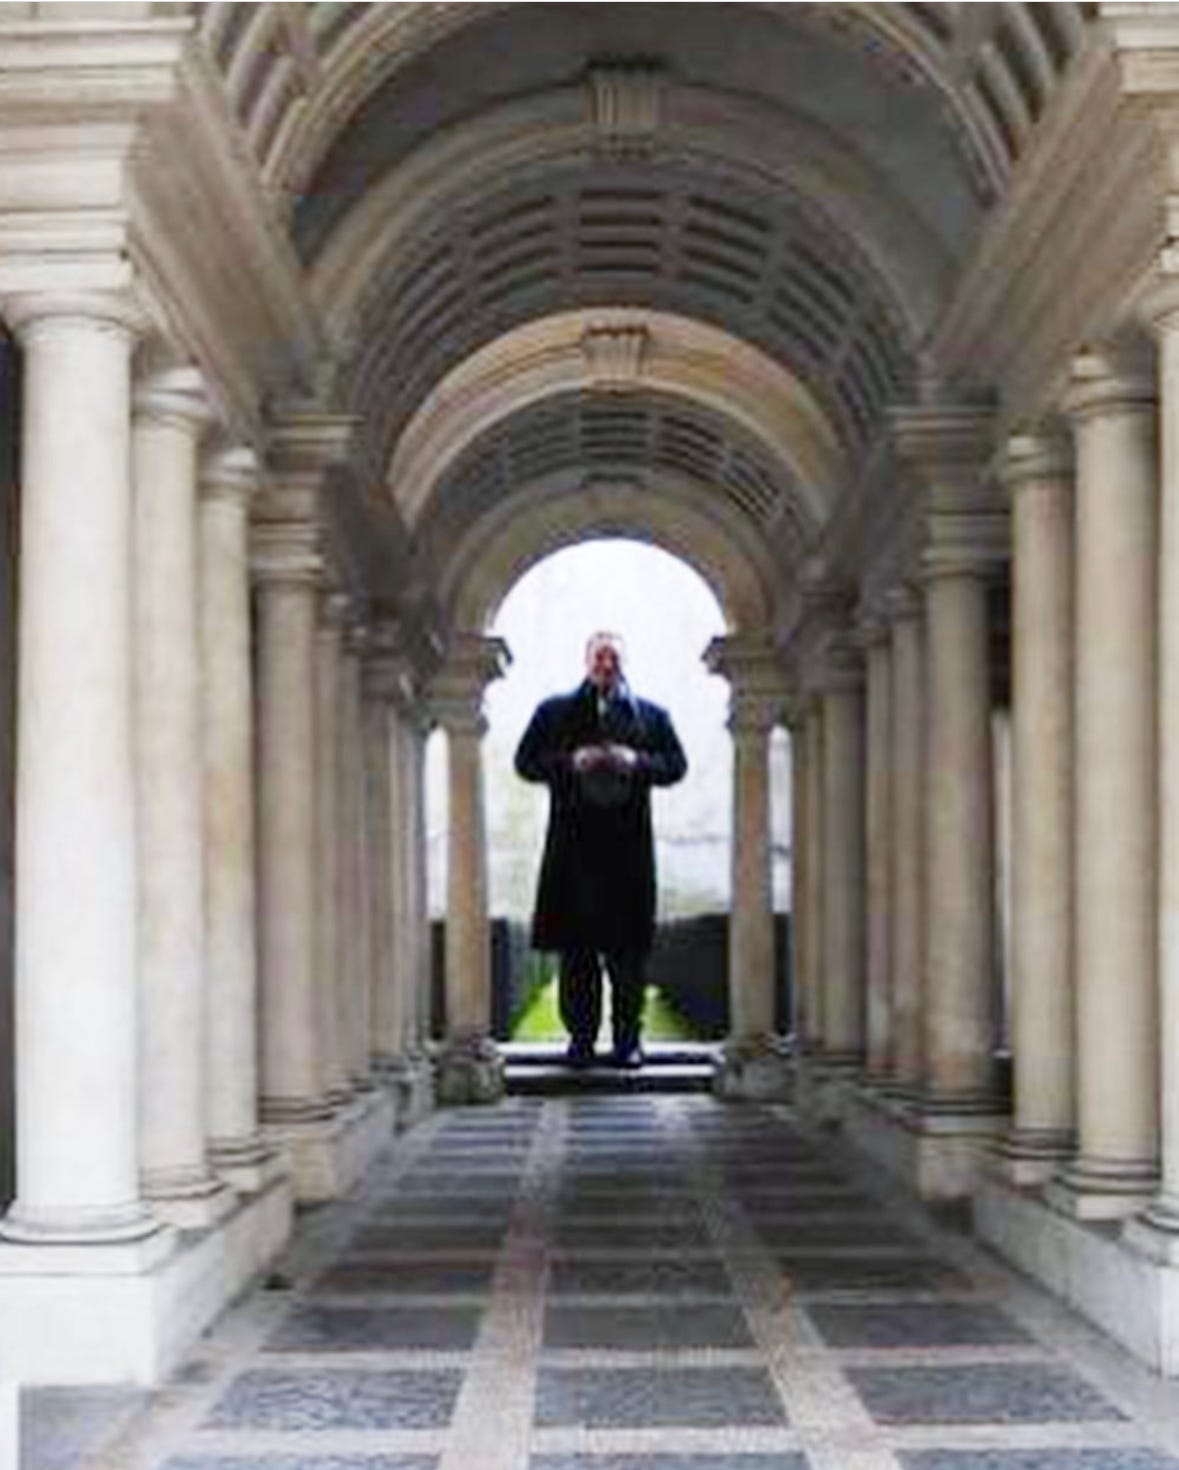 Man standing at the end of Boormini's gallery with columns and paved floor in Rome